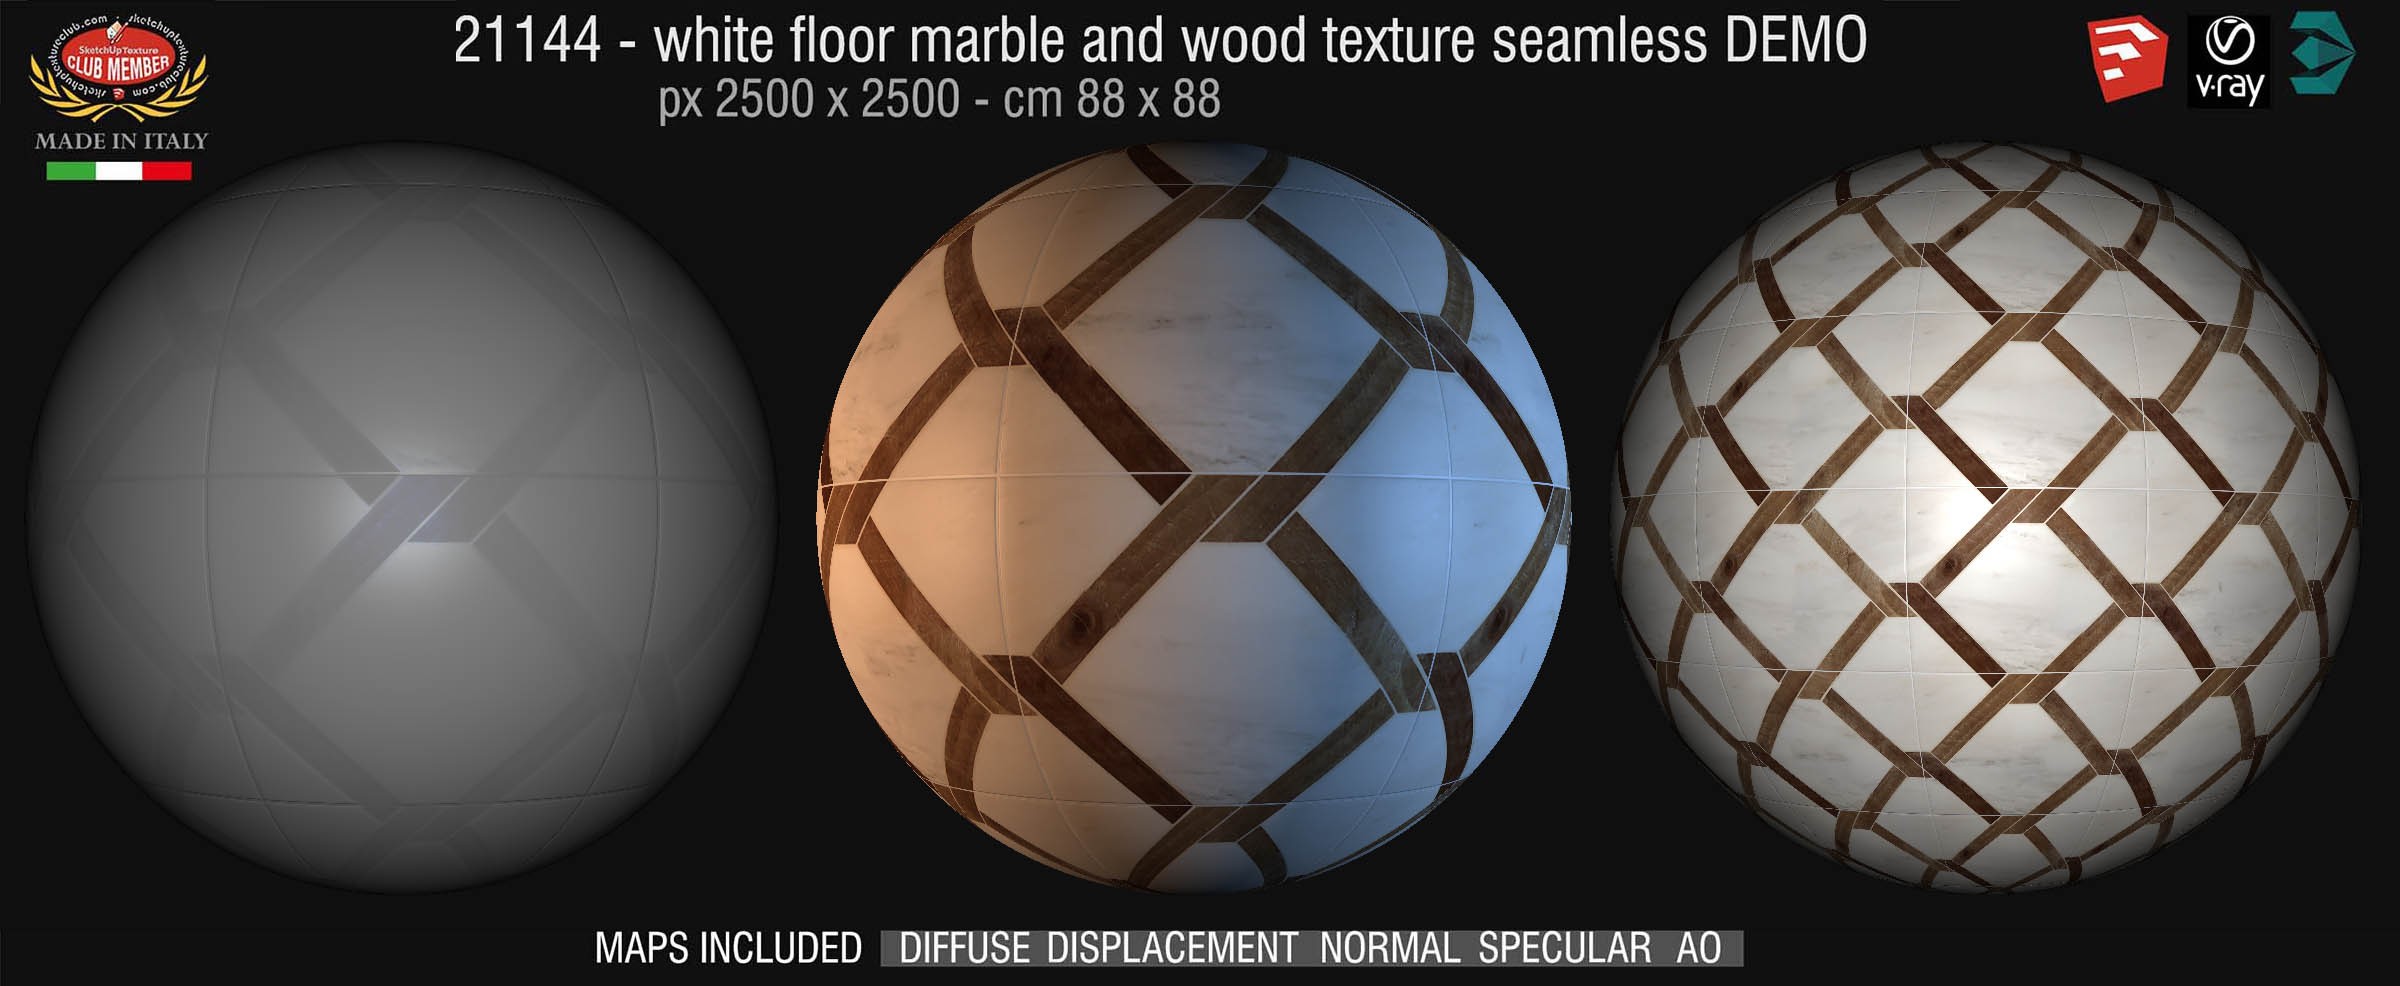 21144 White floor marble and wood texture seamless + maps DEMO